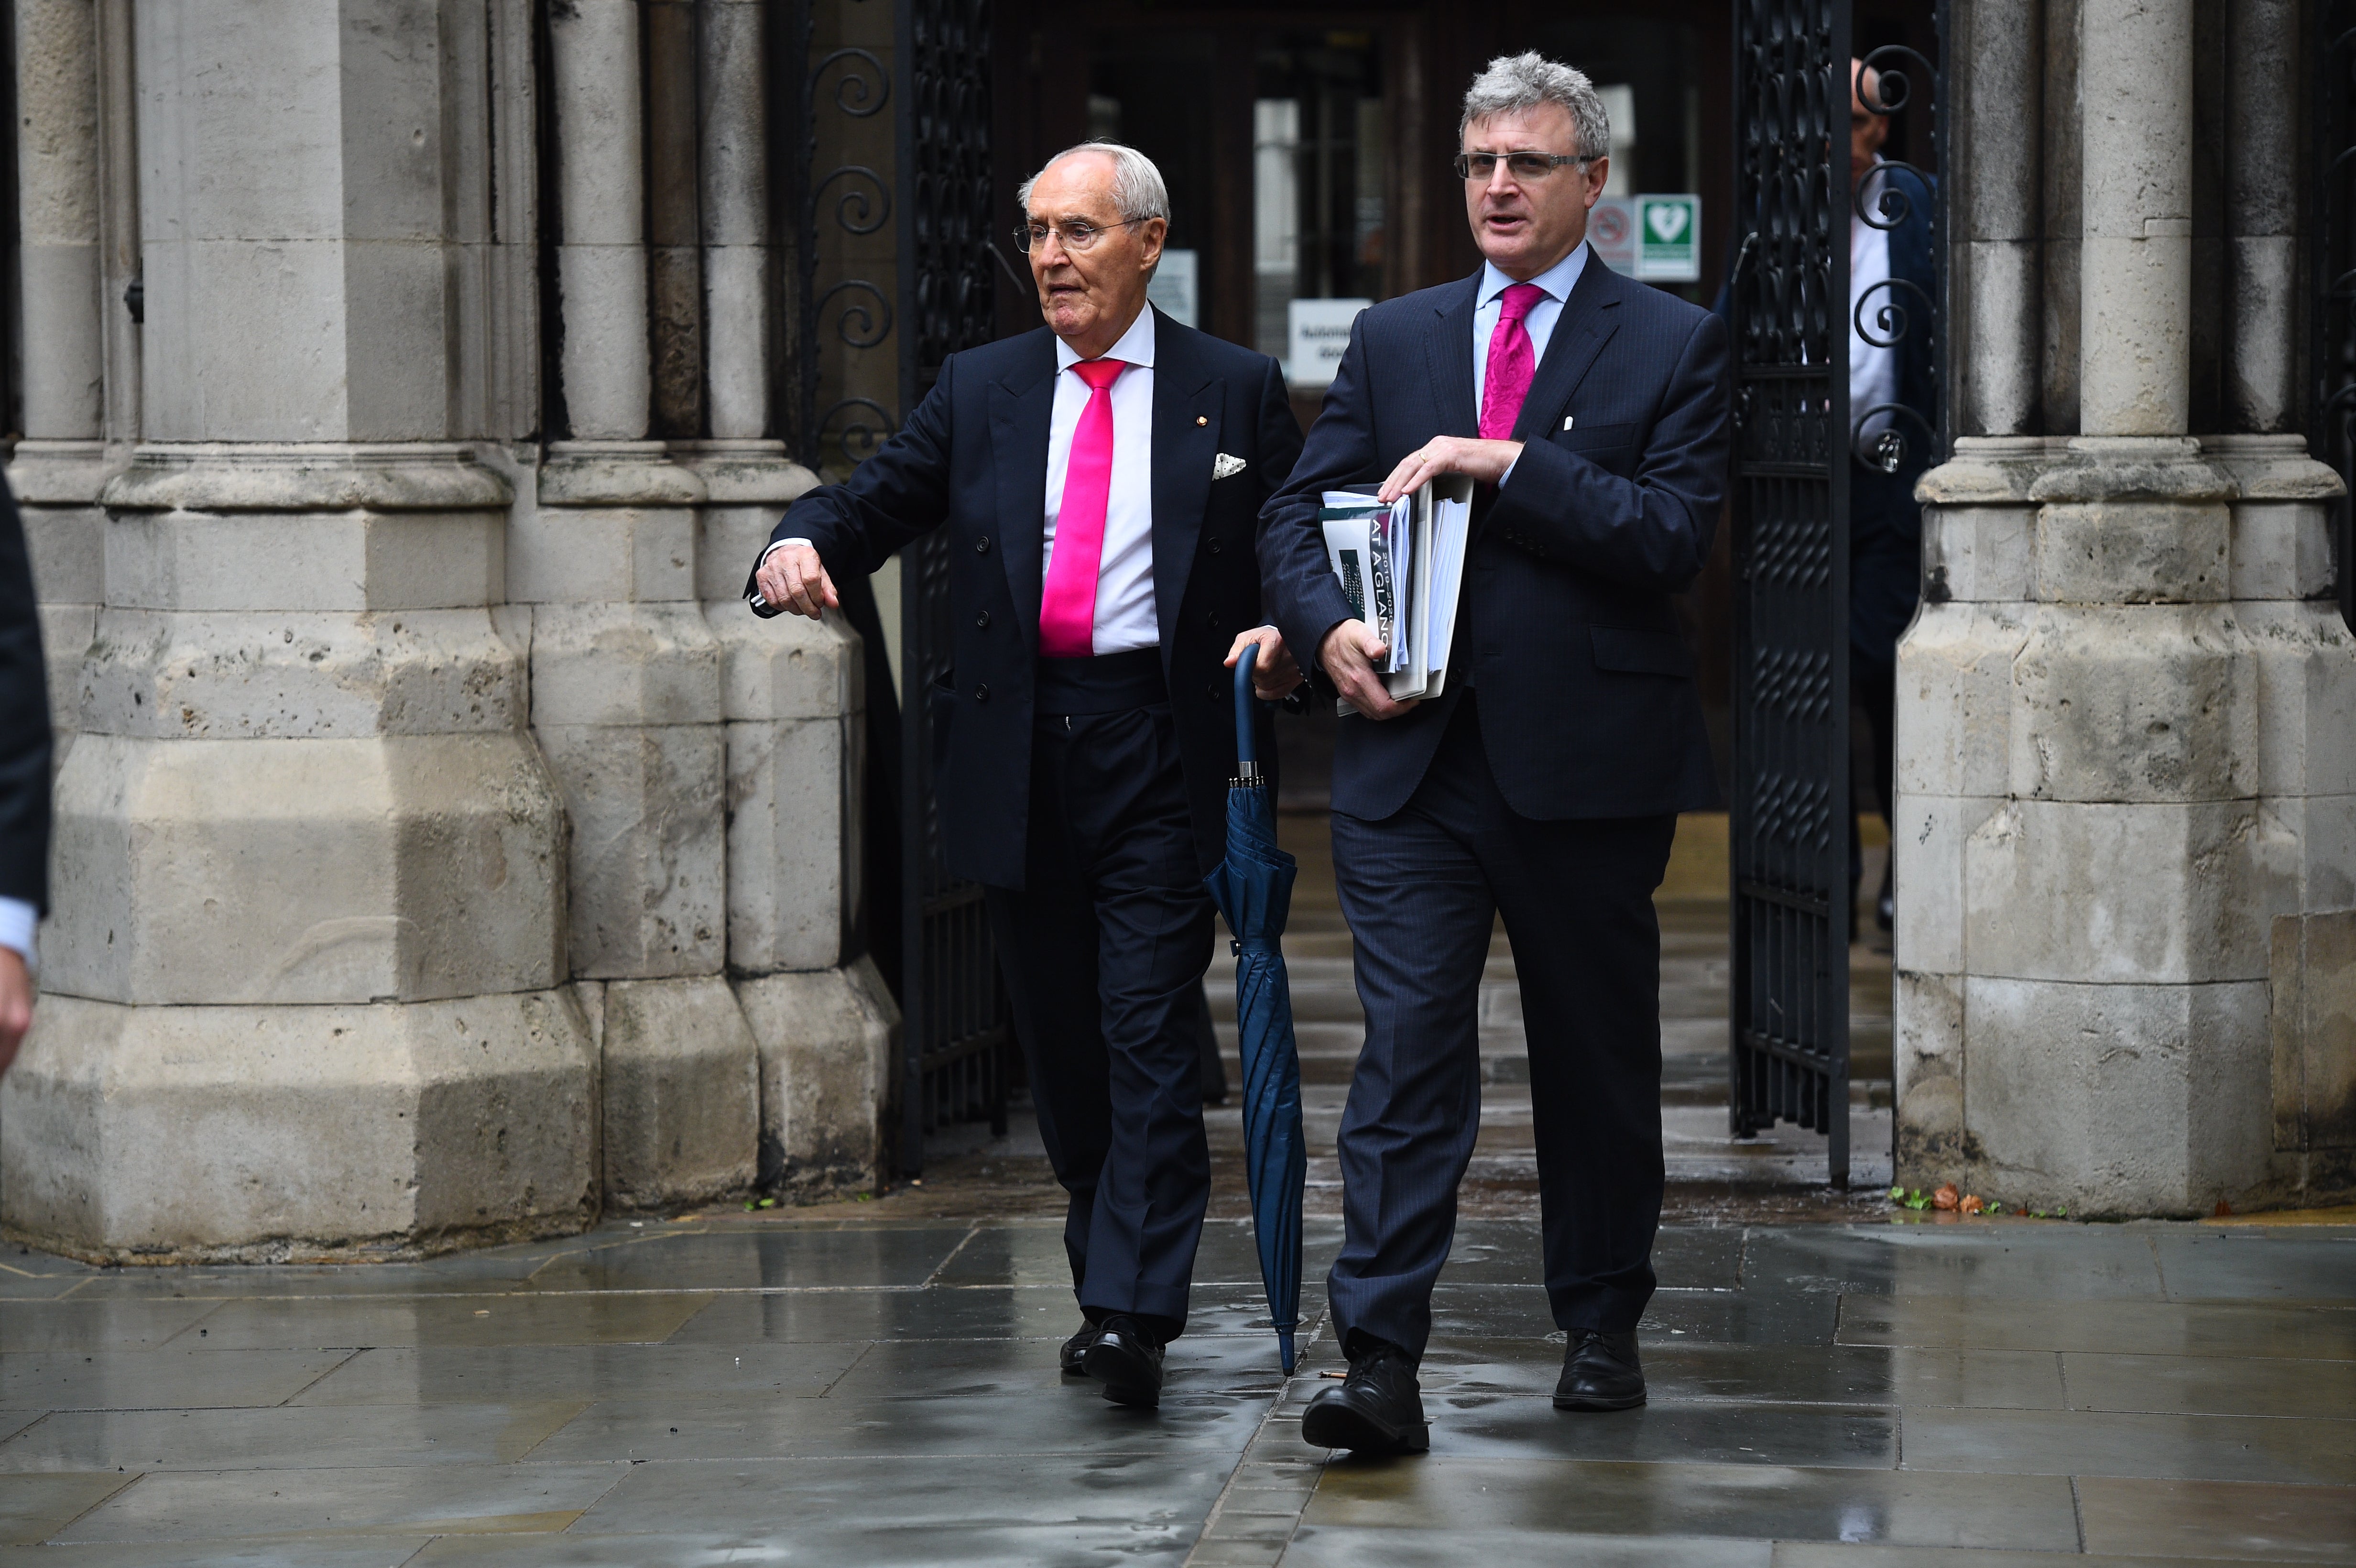 The court was told Sir Frederick, left, ignored orders ‘until his feet were put to the fire’ (Kirsty O’Connor/PA)